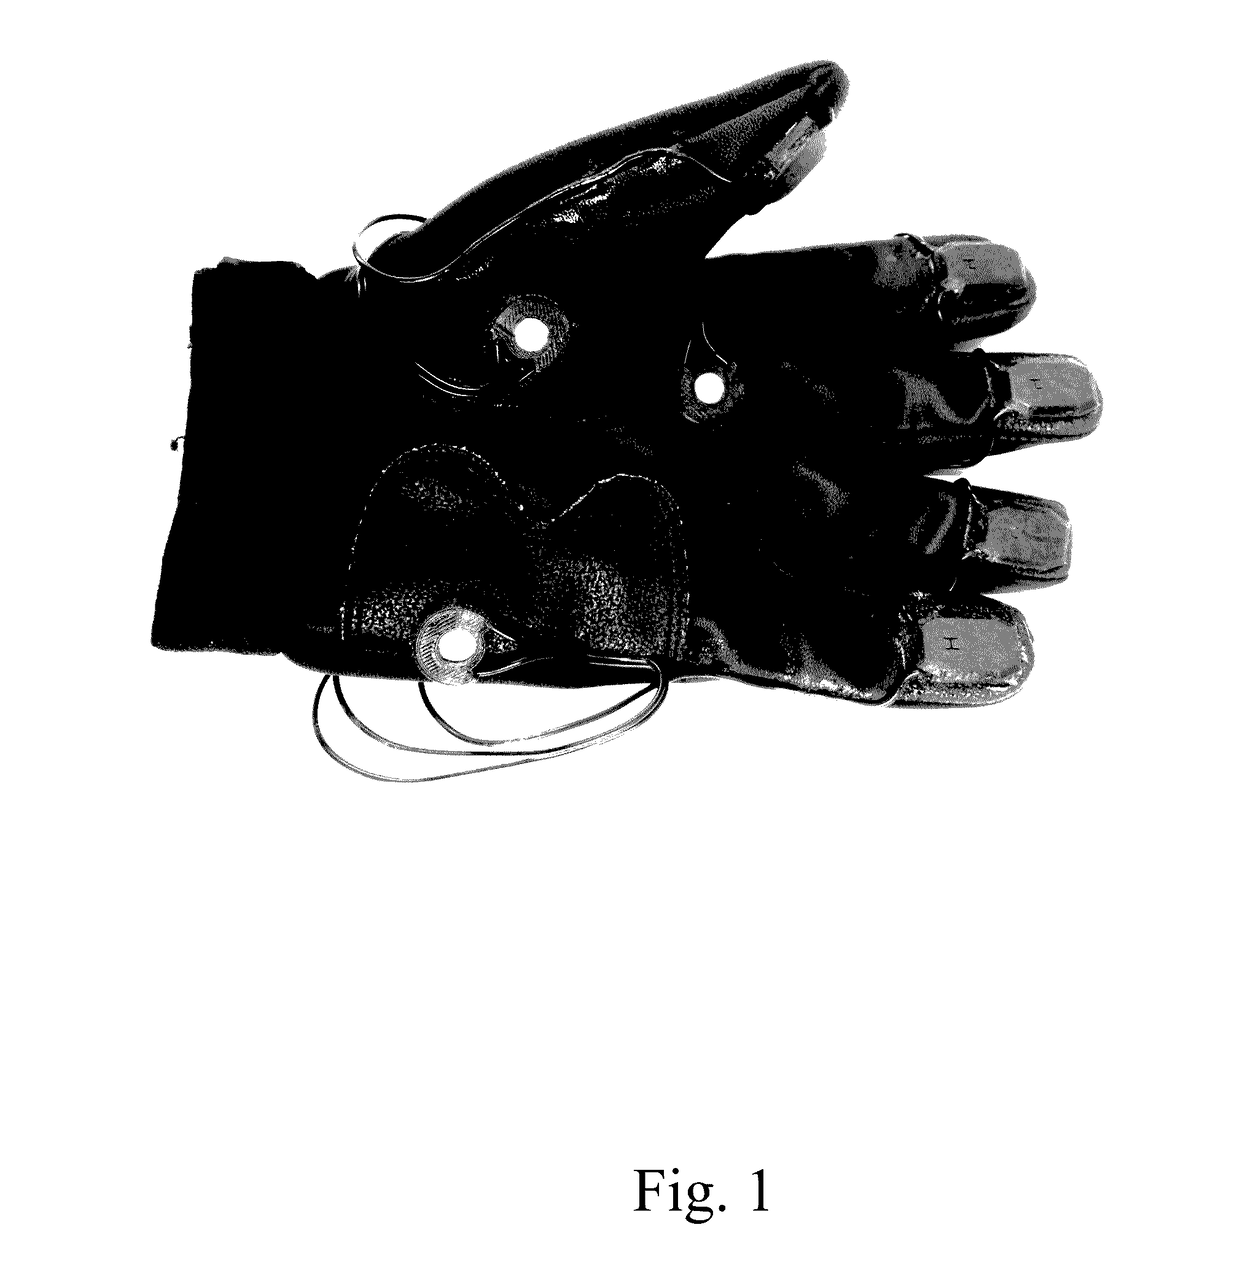 System and Method for Full Motion Capture and Haptic Feedback Suite